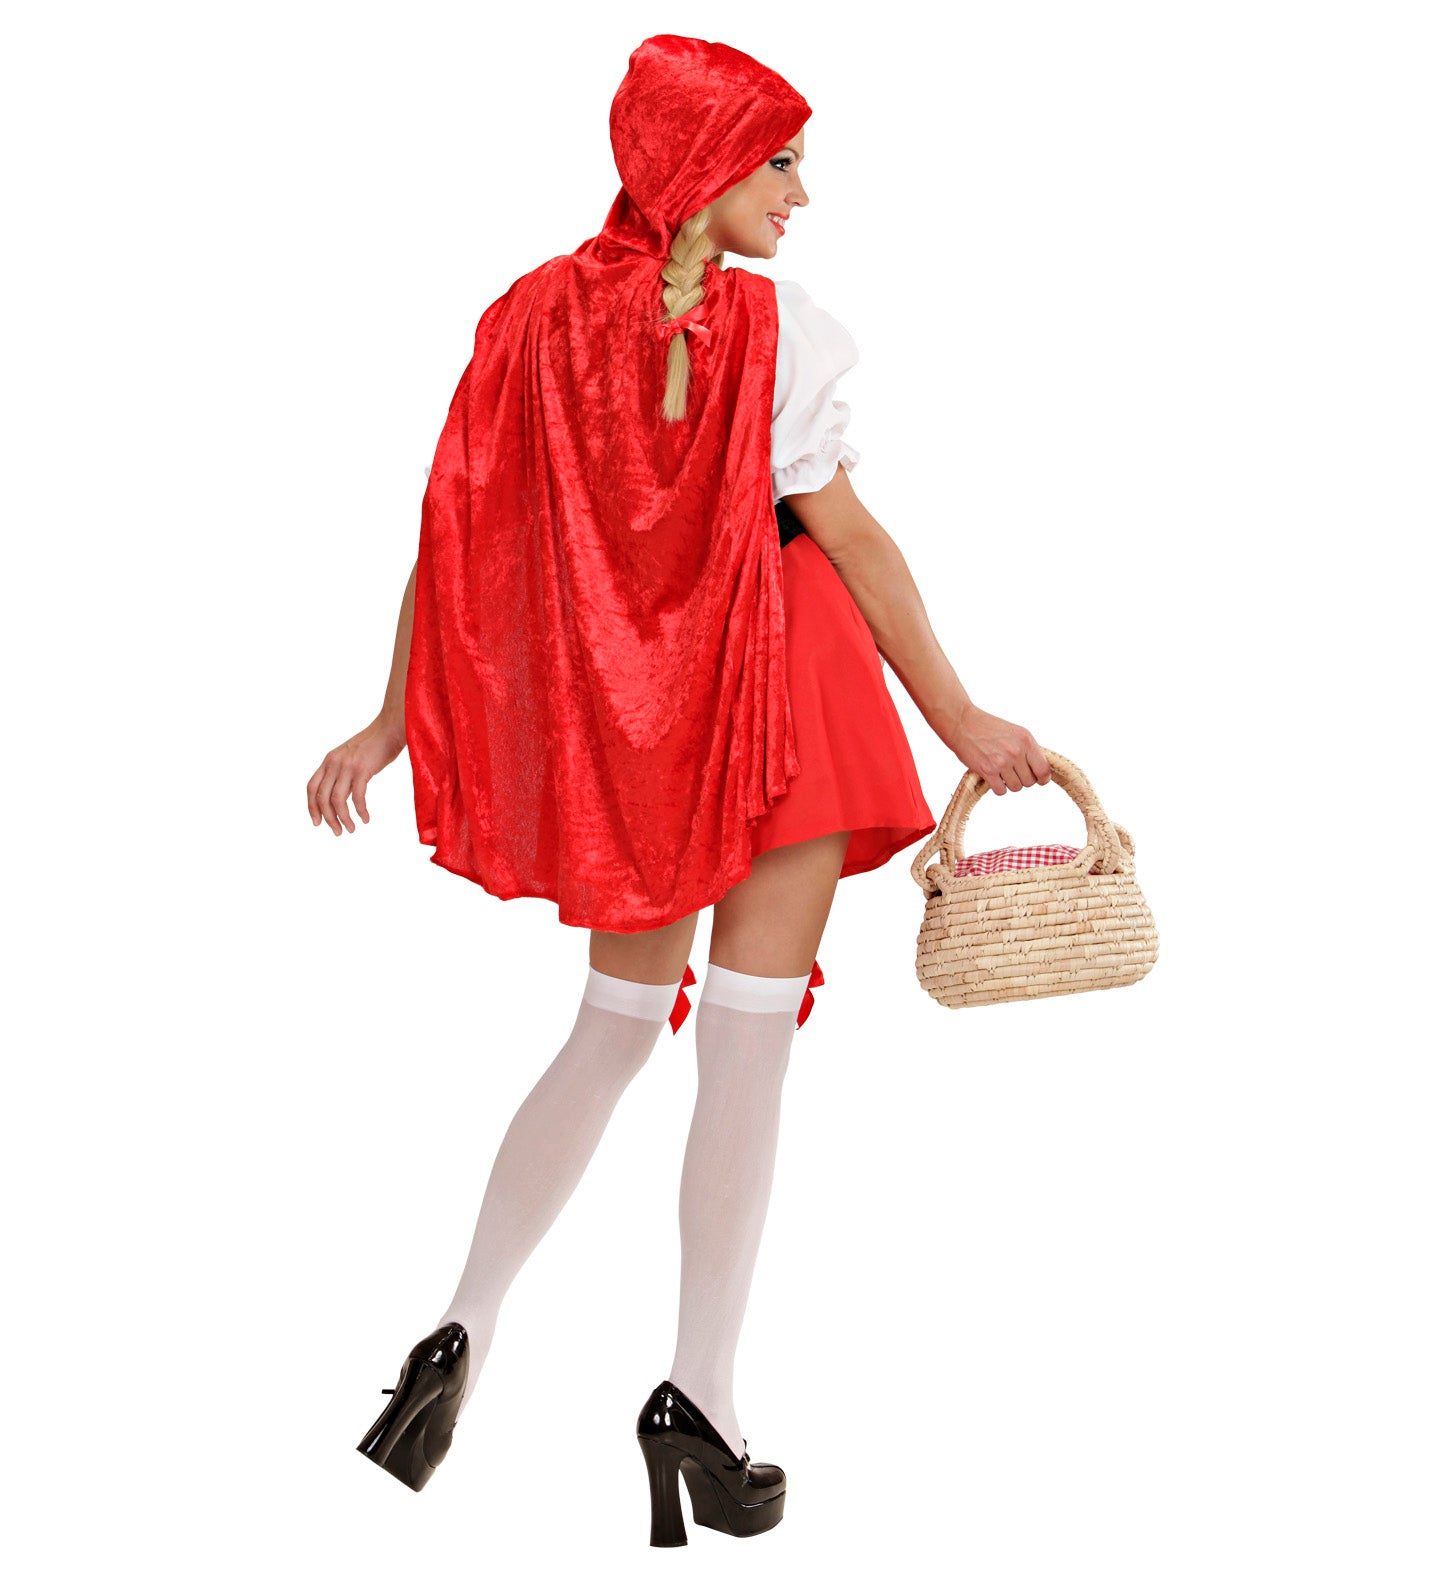 Red Riding Hood Capelet Costume rear